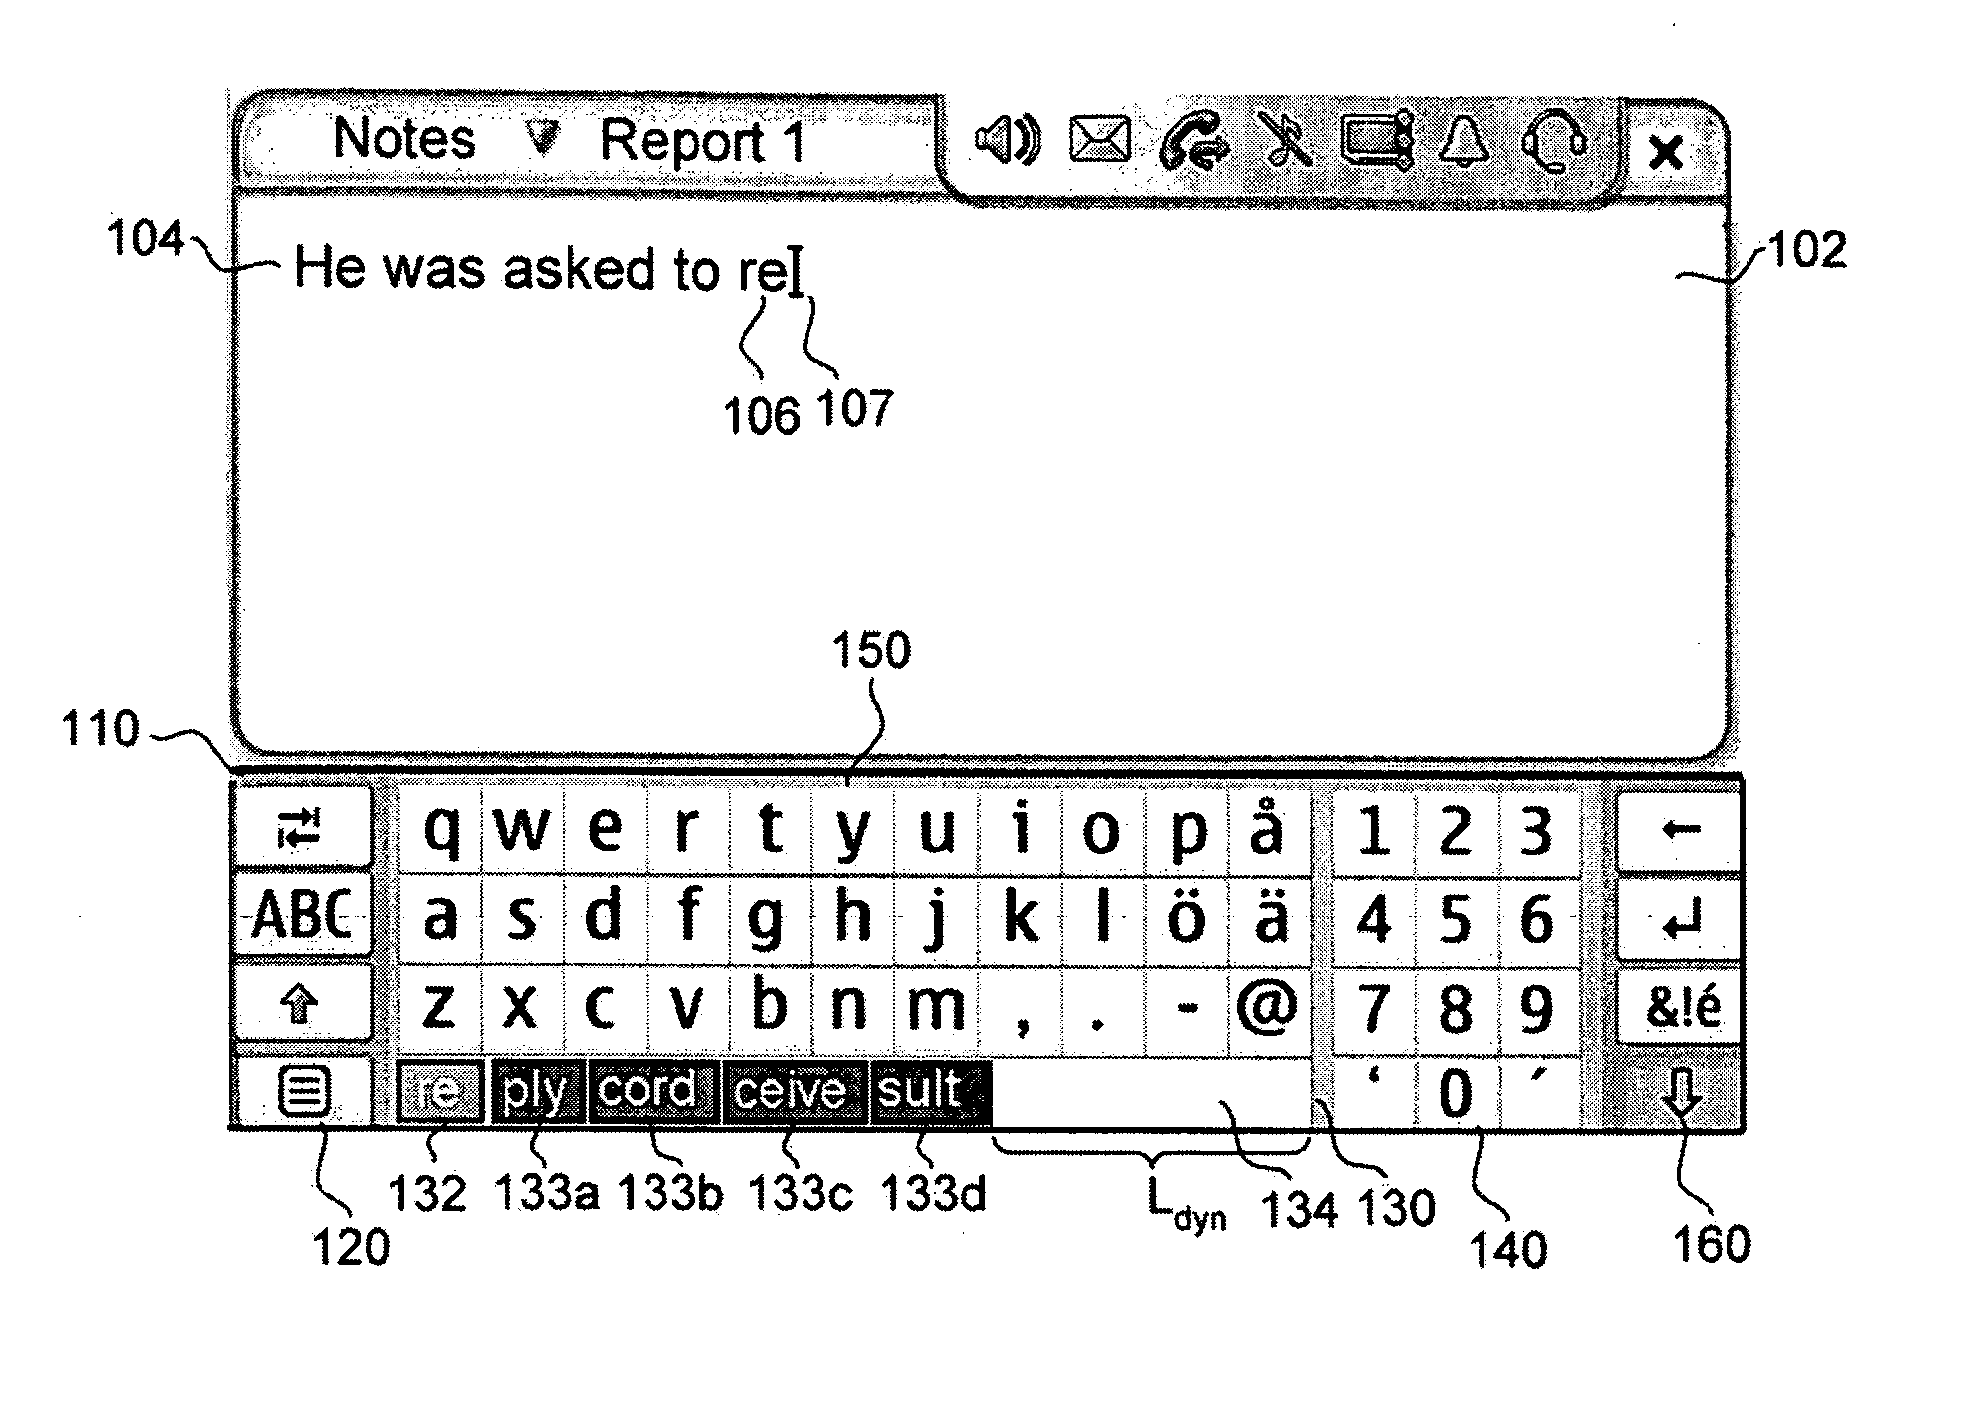 Electronic text input involving word completion functionality for predicting word candidates for partial word inputs